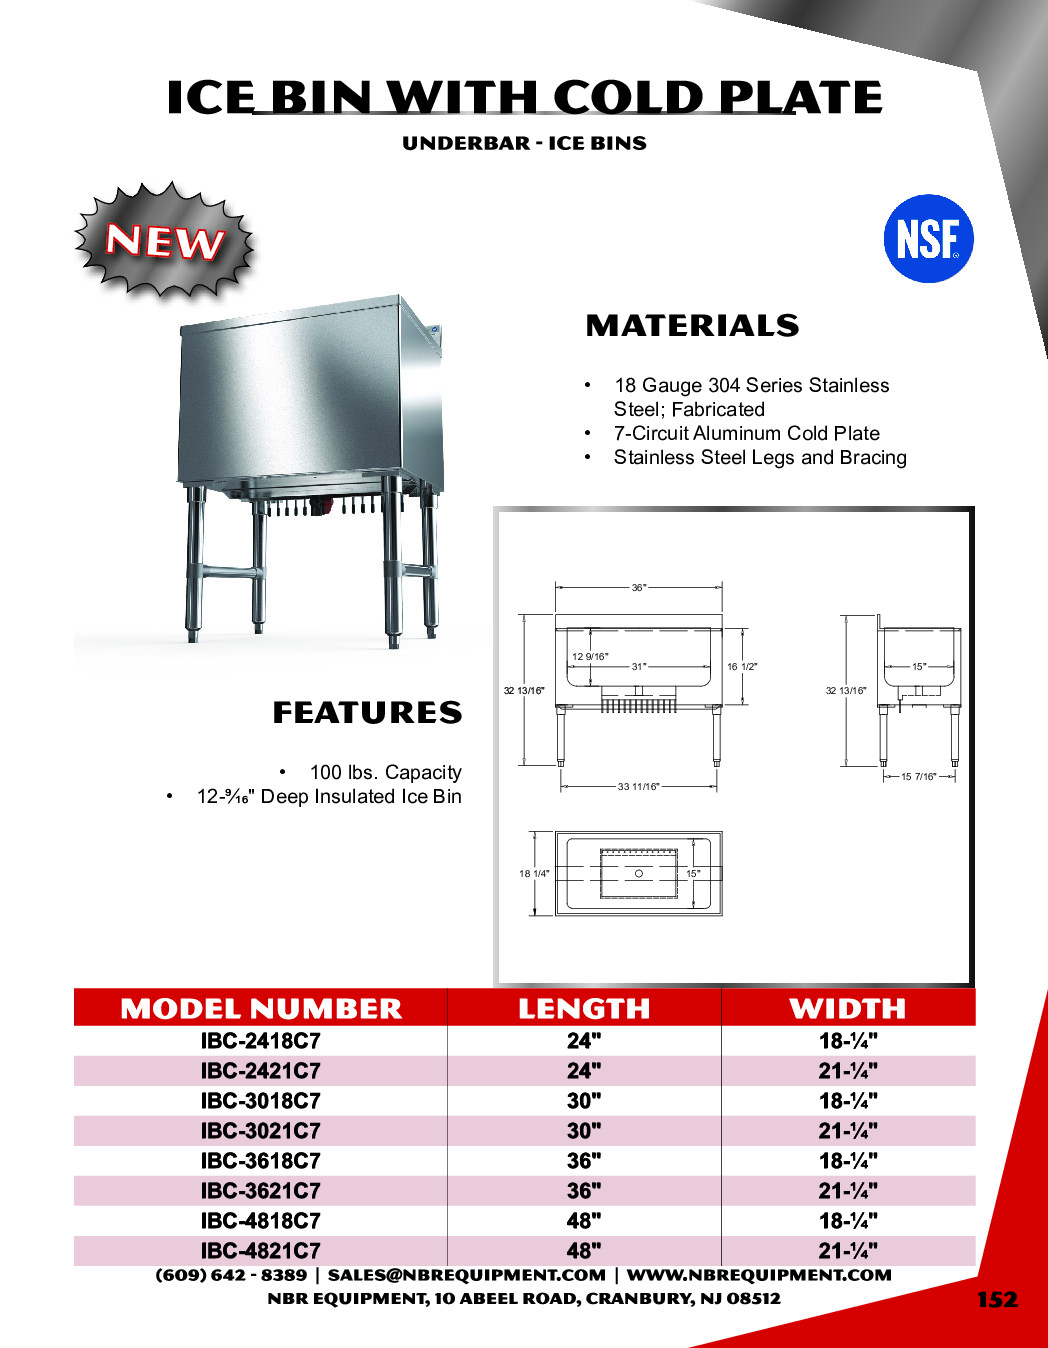 NBR Equipment IBC-3618C7 Stainless Steel Insulated Underbar Ice Bin w/ 7 Circuit Cold Plate